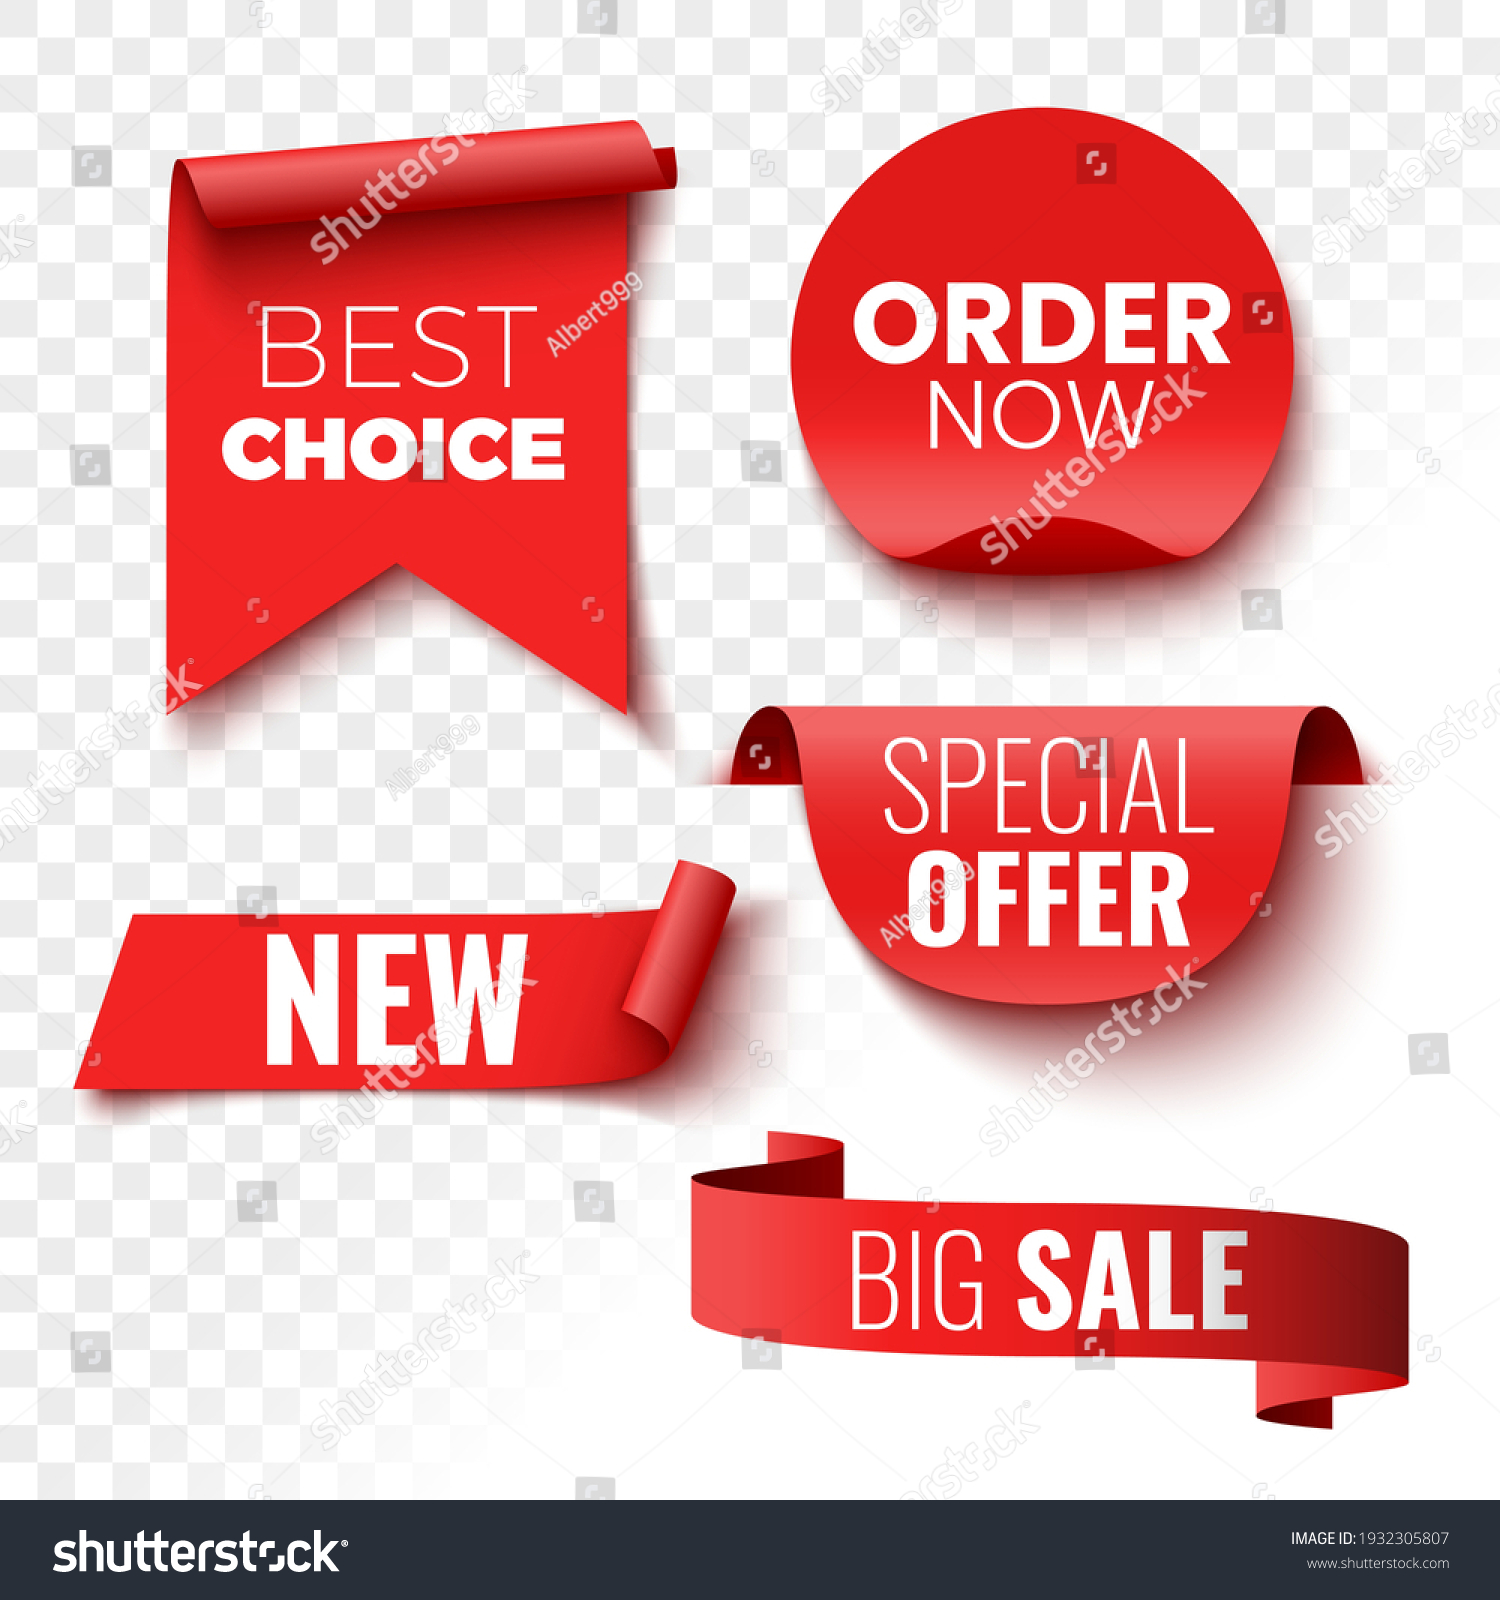 Best choice, order now, special offer, new and big sale banners. Red ribbons, tags and stickers. Vector illustration. #1932305807